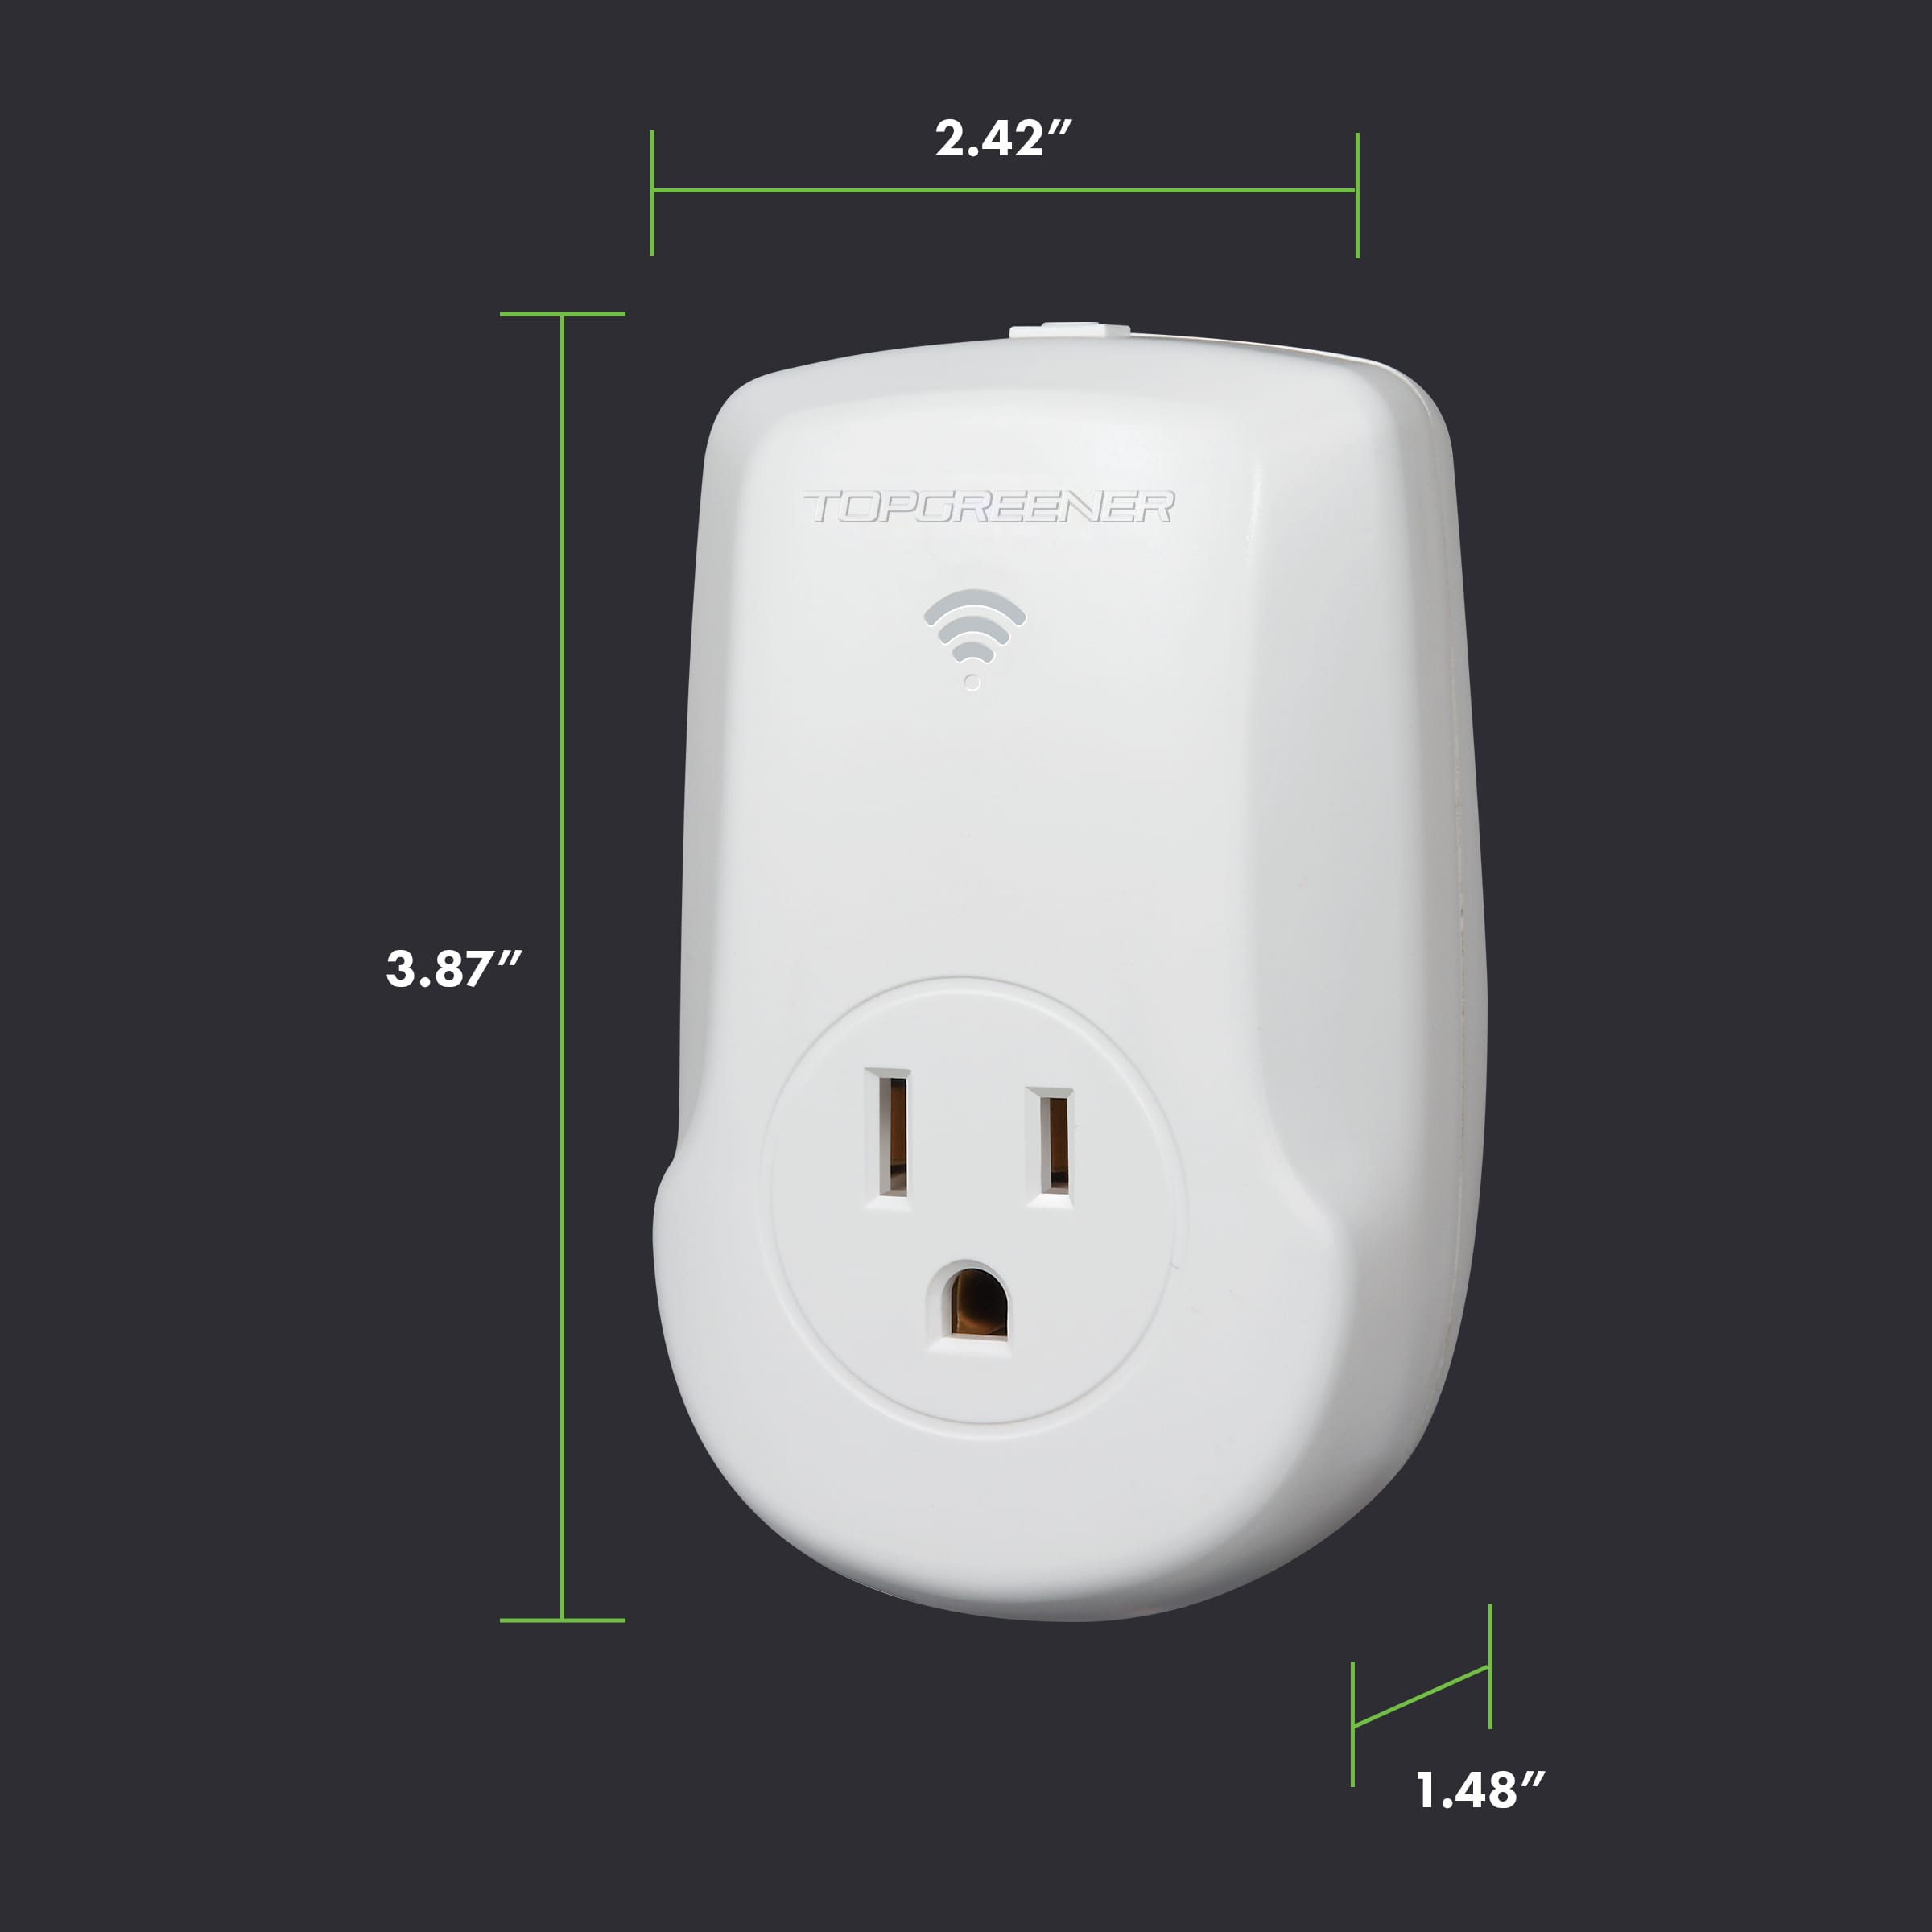 Heavy-Duty Smart Wi-Fi Plug-in (15A) with Energy Monitoring